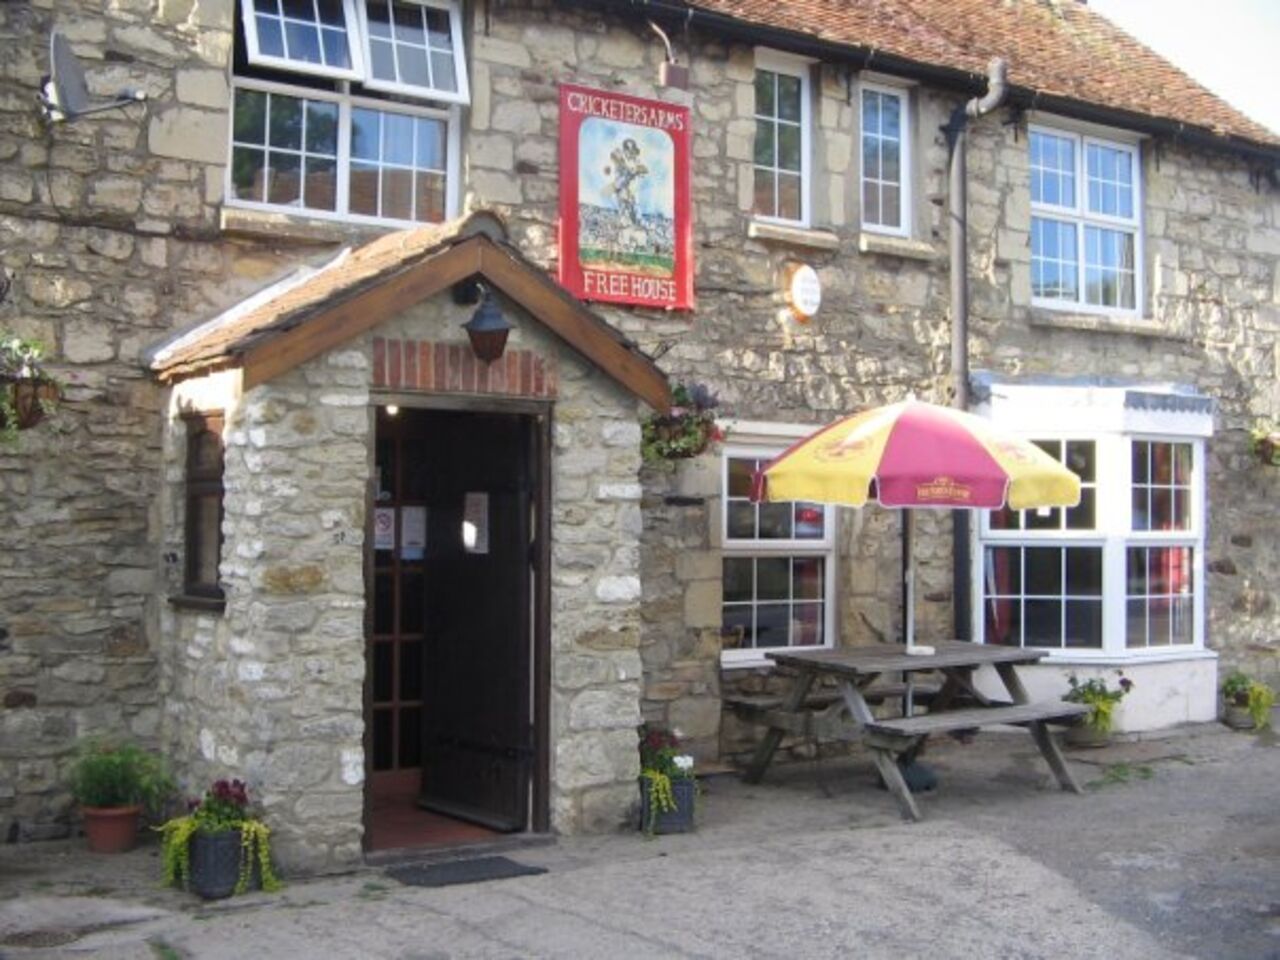 A photo of The Cricketers Arms